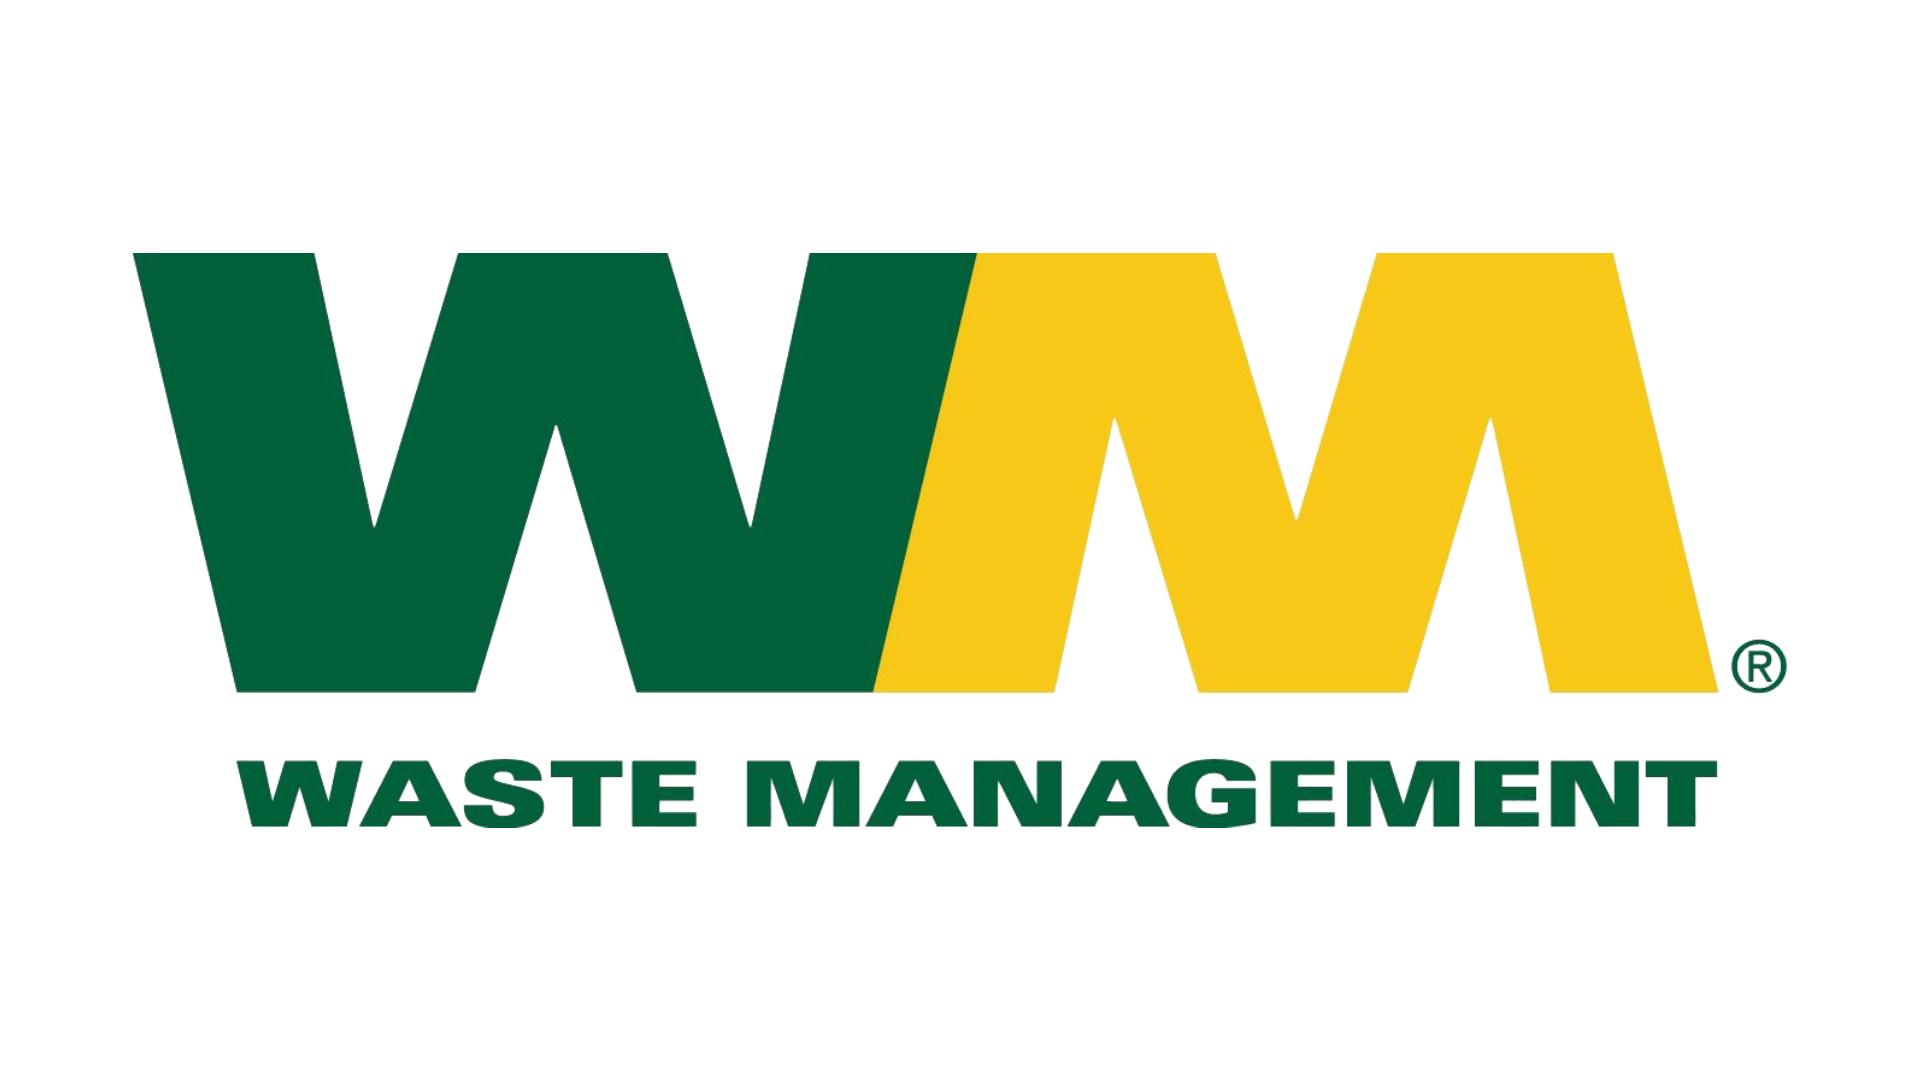 Let's Recycle Right Together - Waste Management